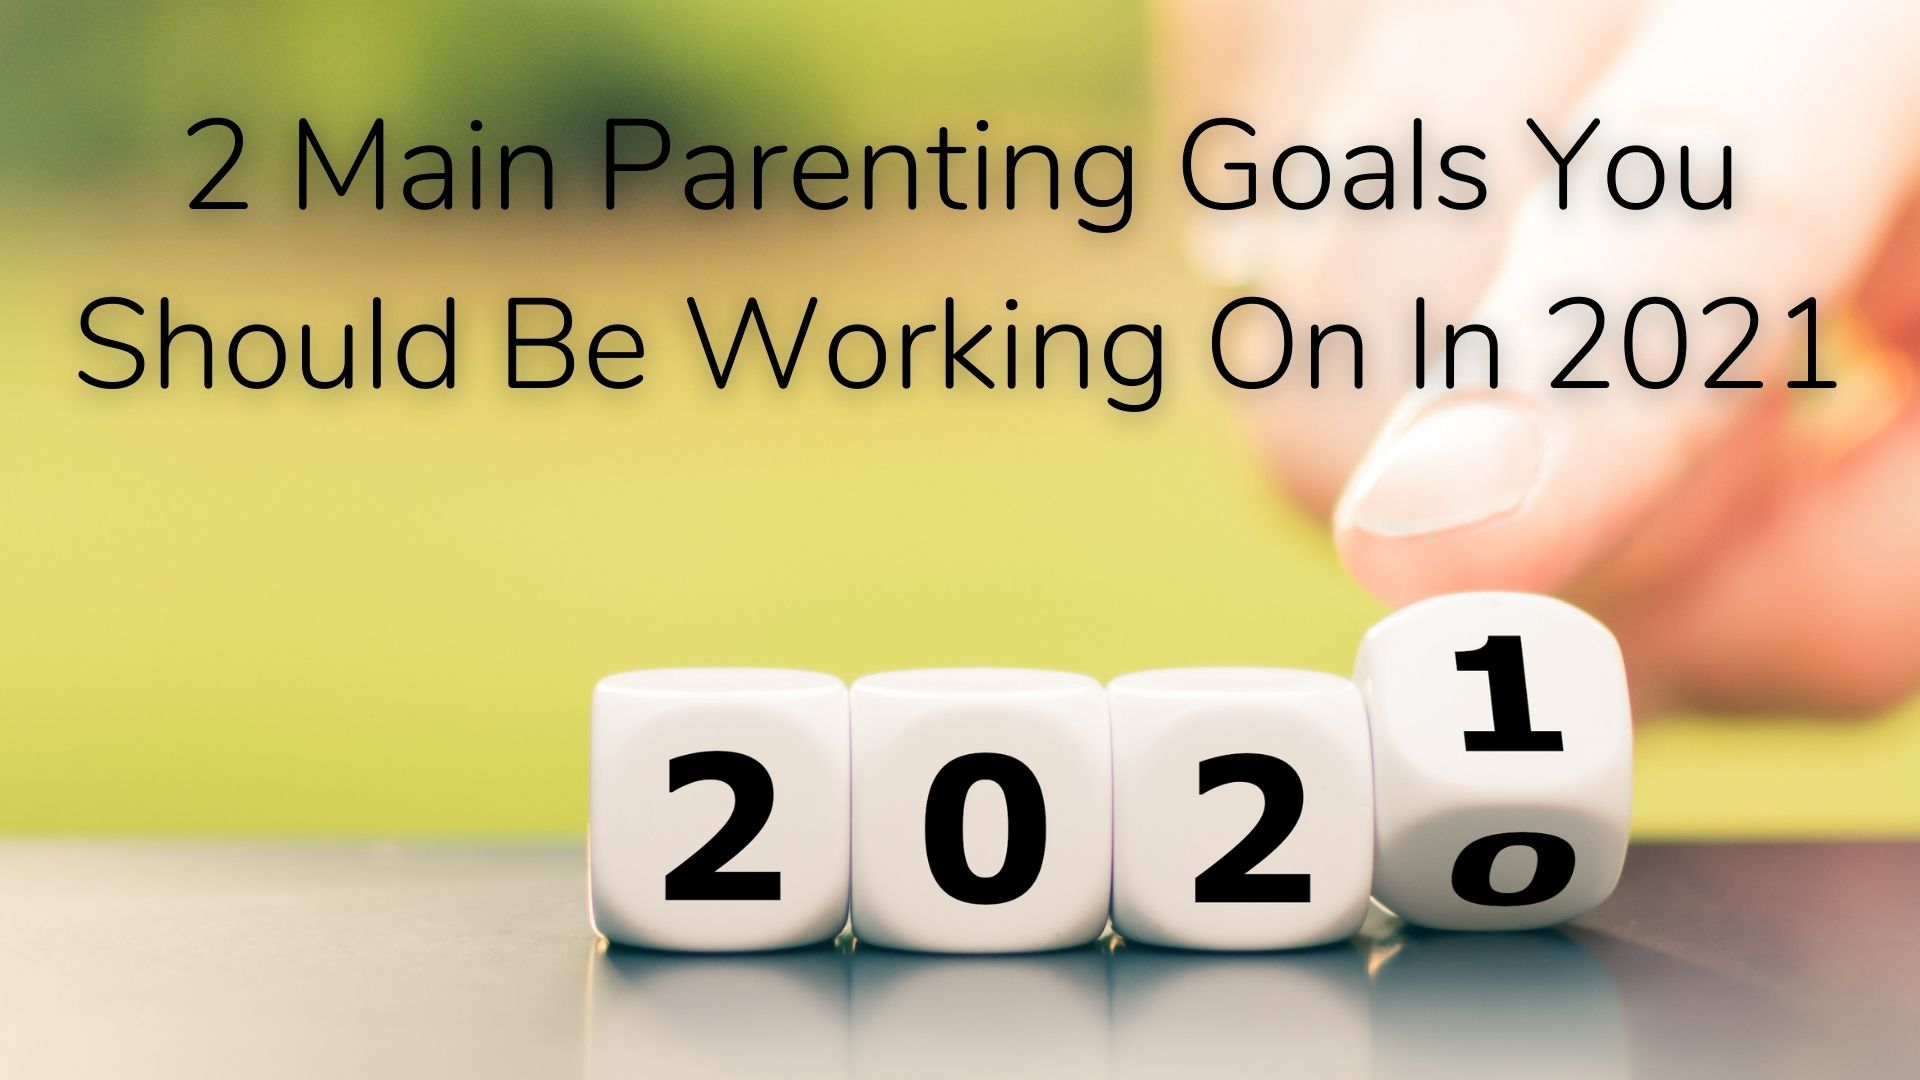 2 Main Parenting Goals You Should Be Working On In 2021